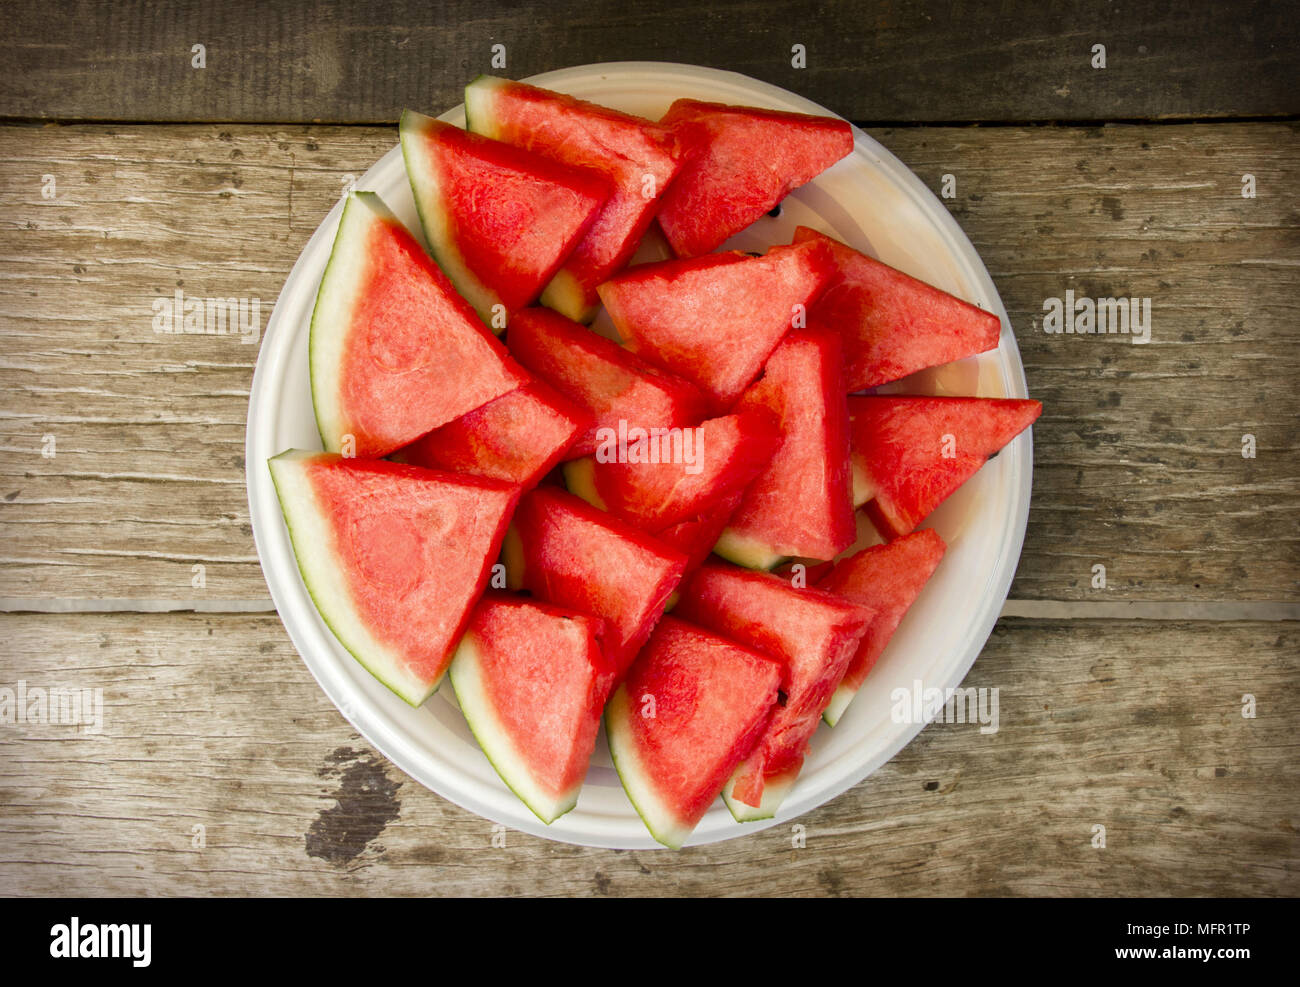 Seedless watermelon cut into wedges serving on dish Stock Photo